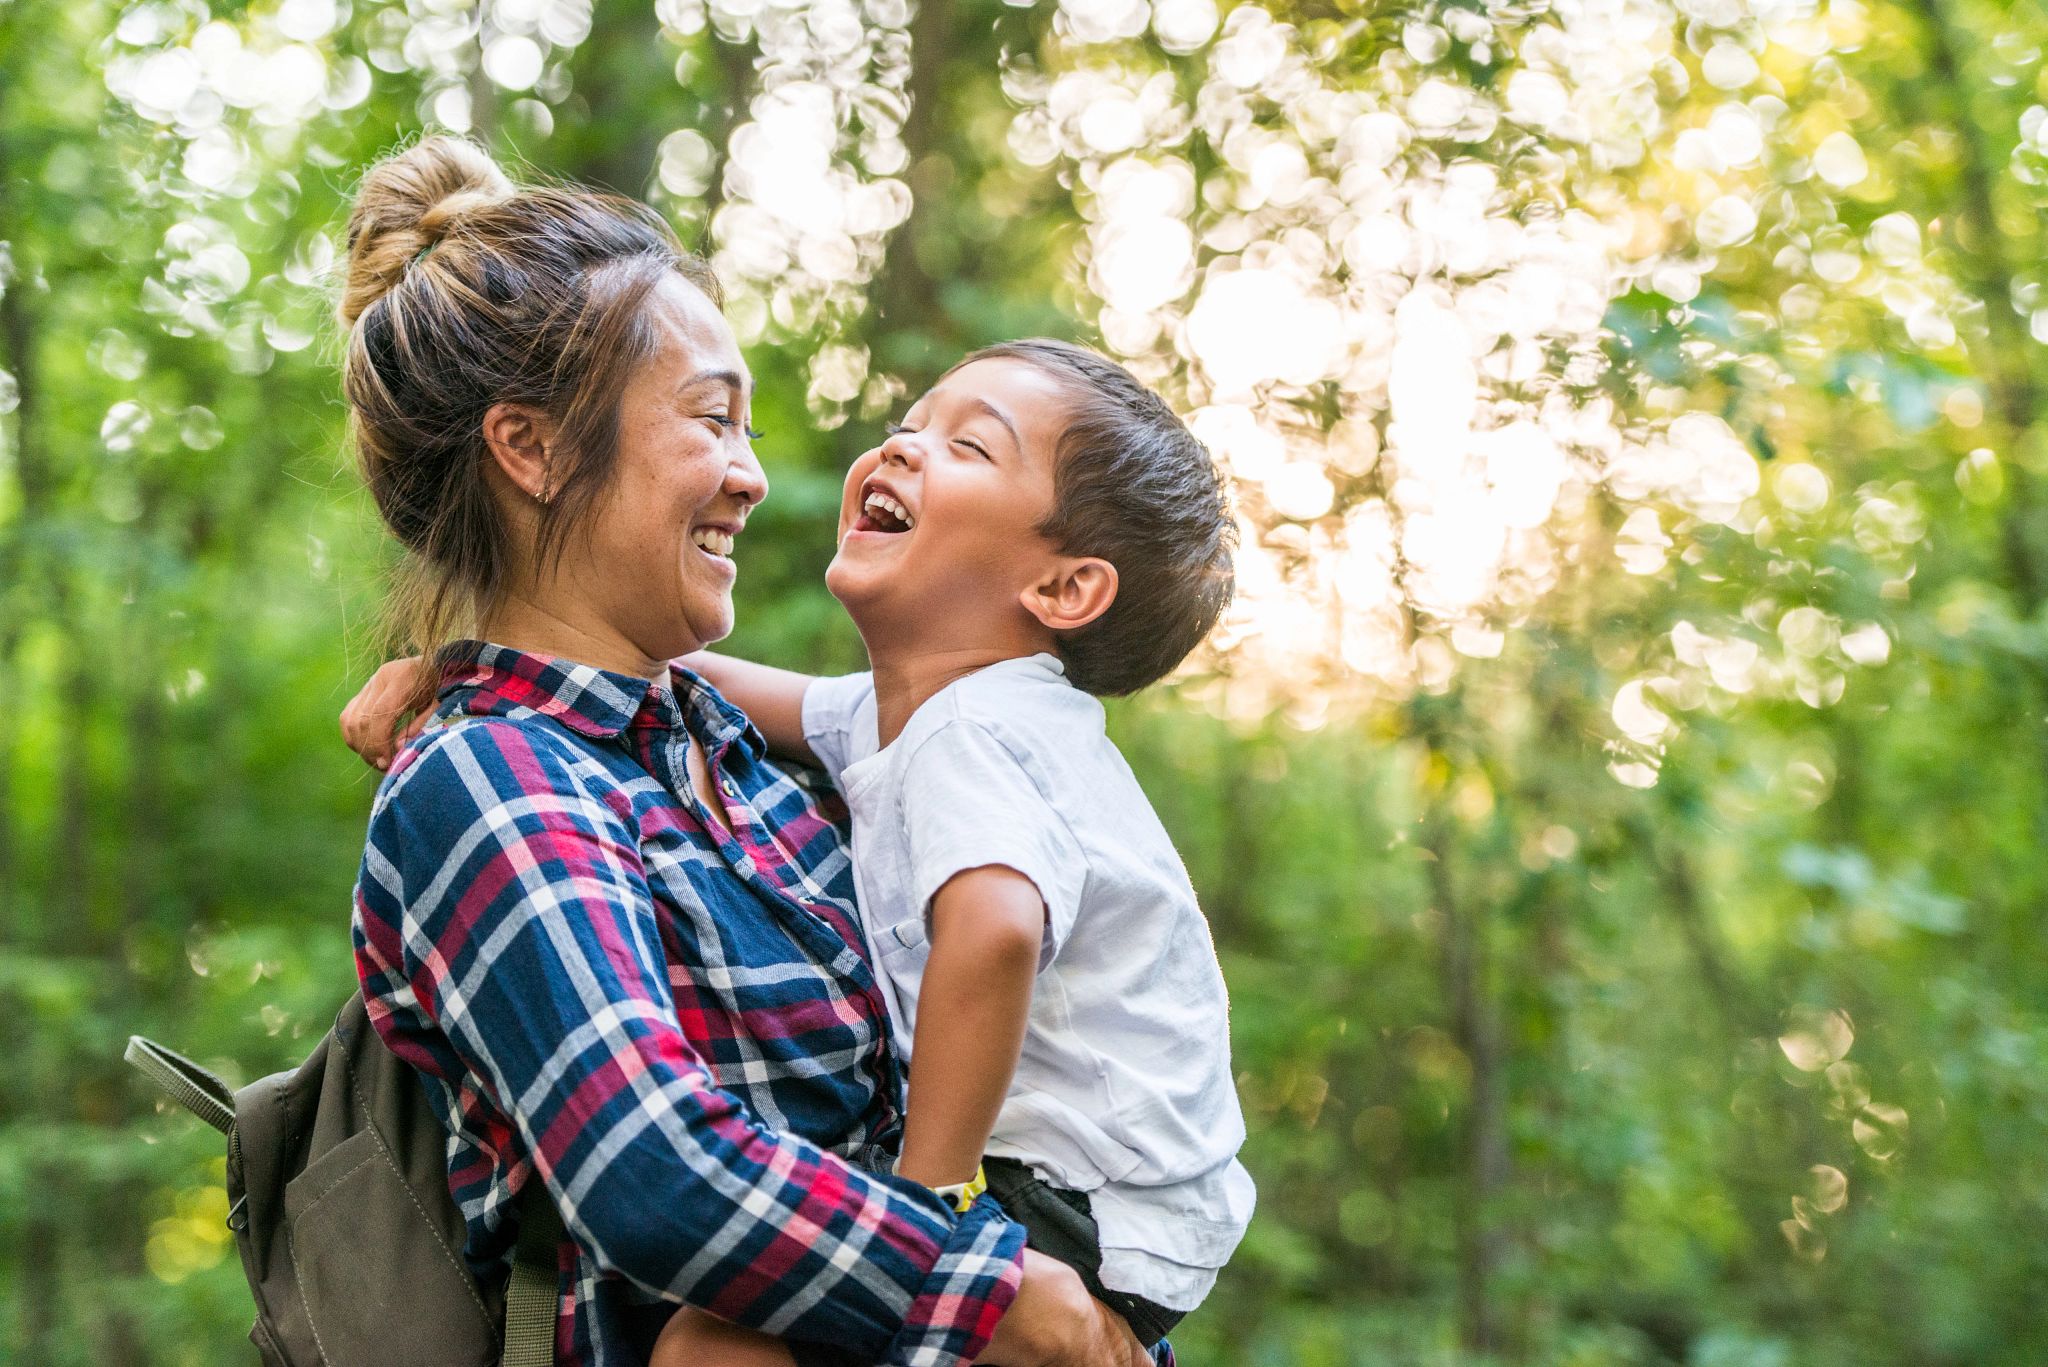 Image of a mother and son smiling together while outdoors. 